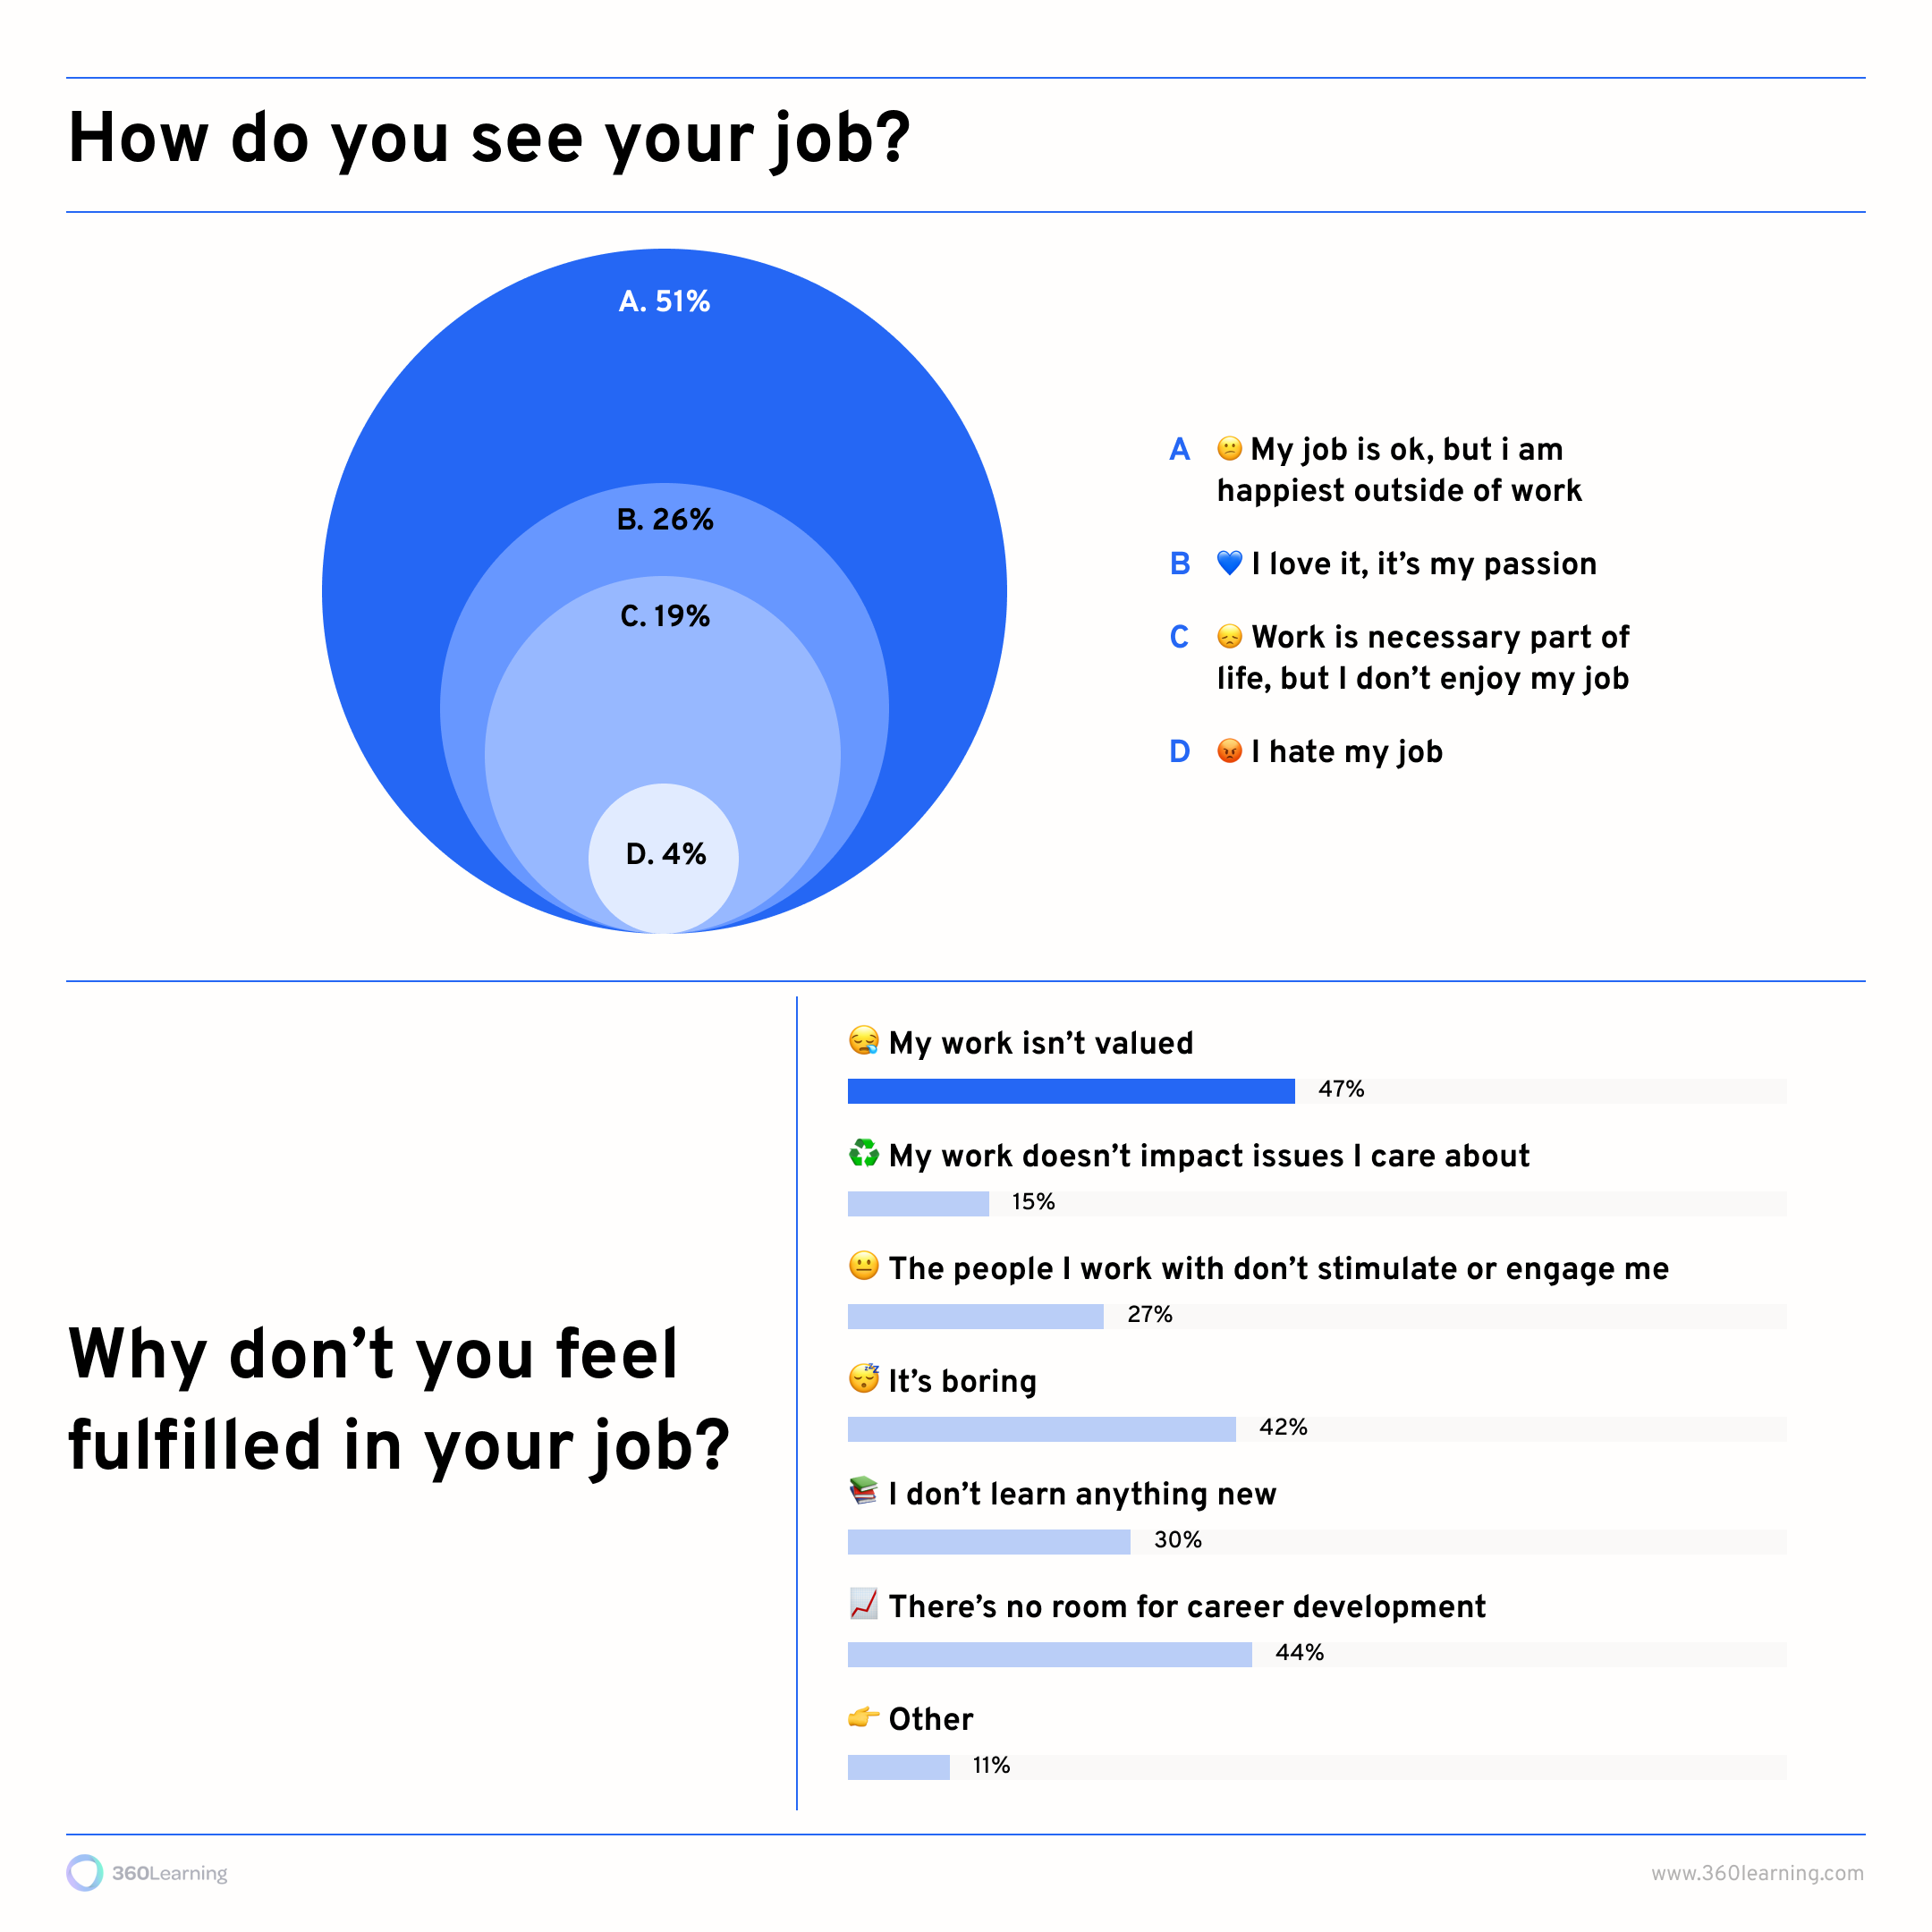 How employees see their jobs